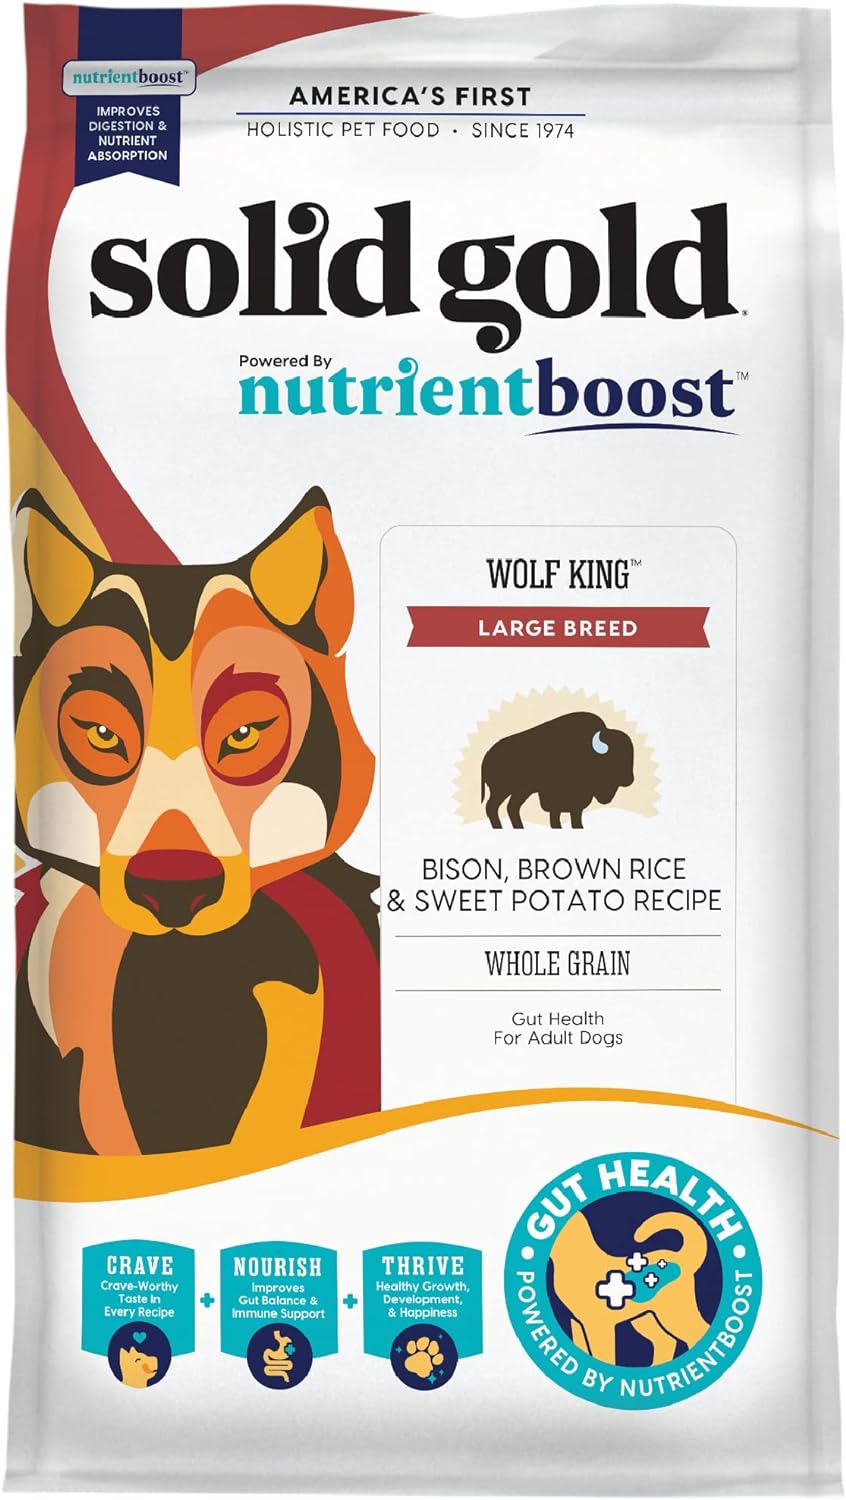 Solid Gold Nutrientboost Wolf King Large Breed Dog Food - Whole Grain Dry Dog Food Kibble Made with Real Bison, Brown Rice & Sweet Potato - Omega 3, Superfood & Digestive Probiotics - 22 LB Bag